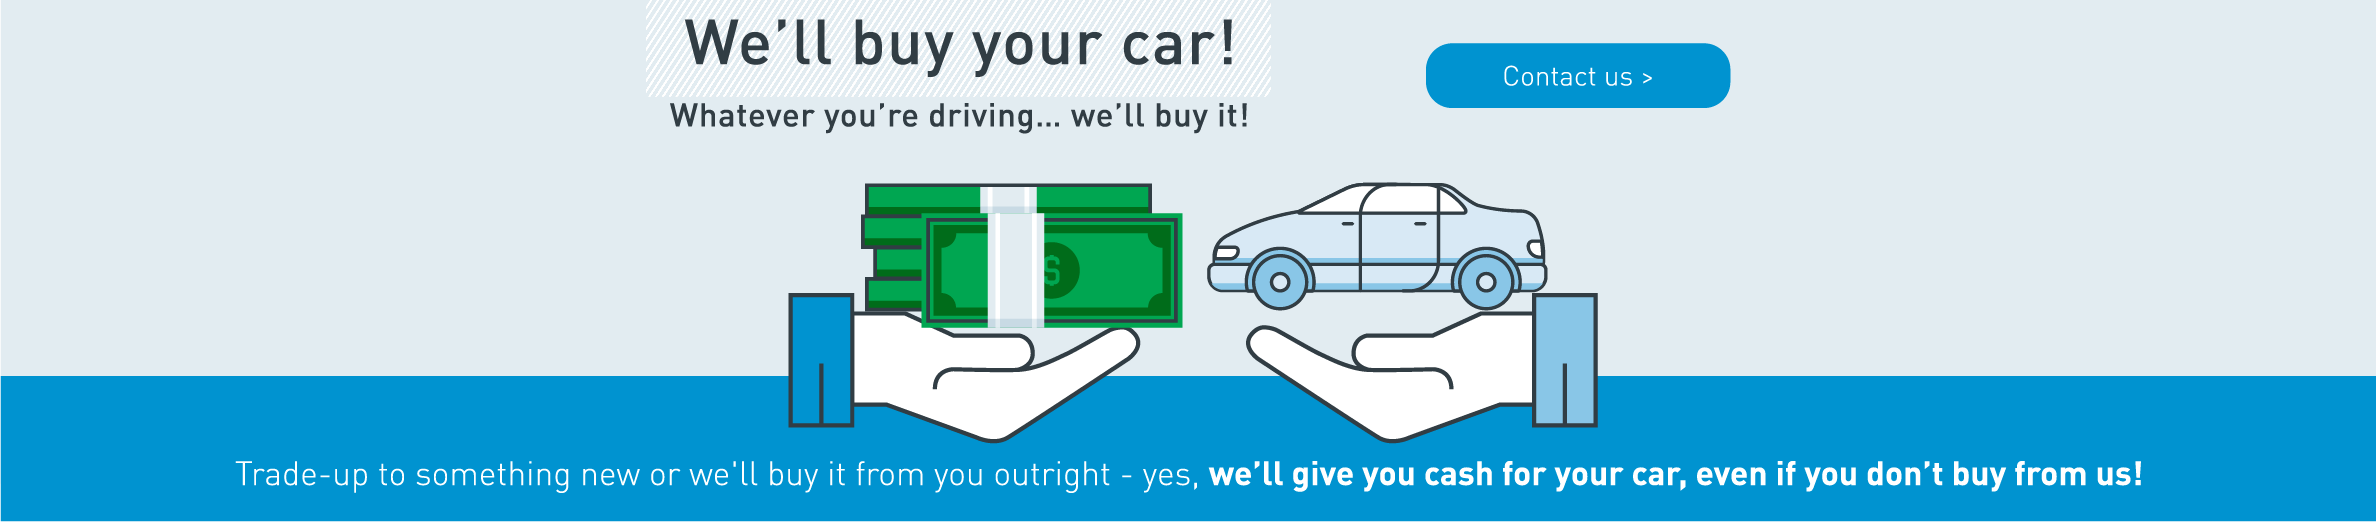 We'll Buy Your Car!